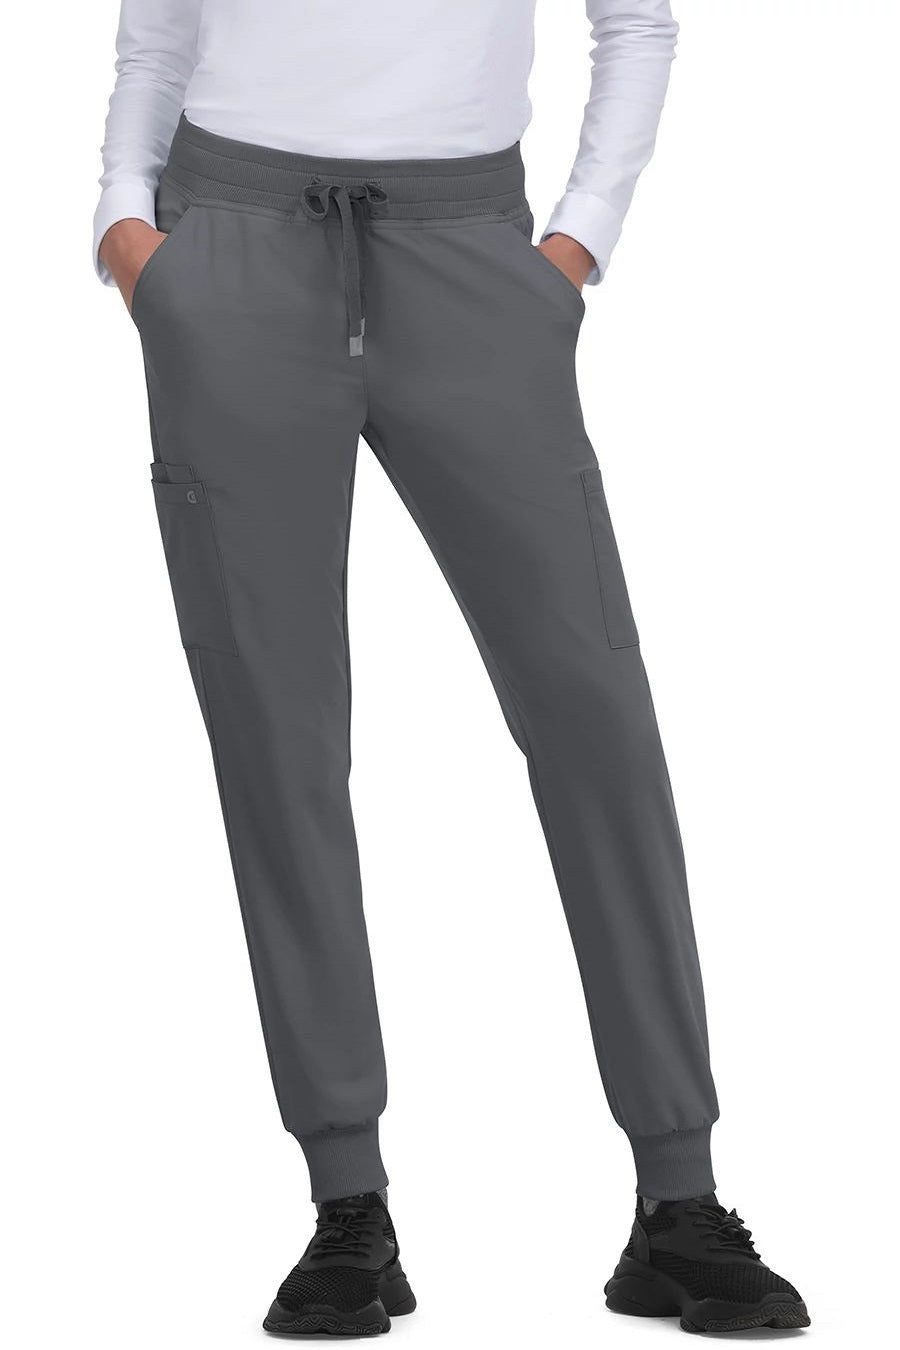 koi Scrub Pants Cureology Pulse Jogger in Pewter at Parker's Clothing and Shoes.